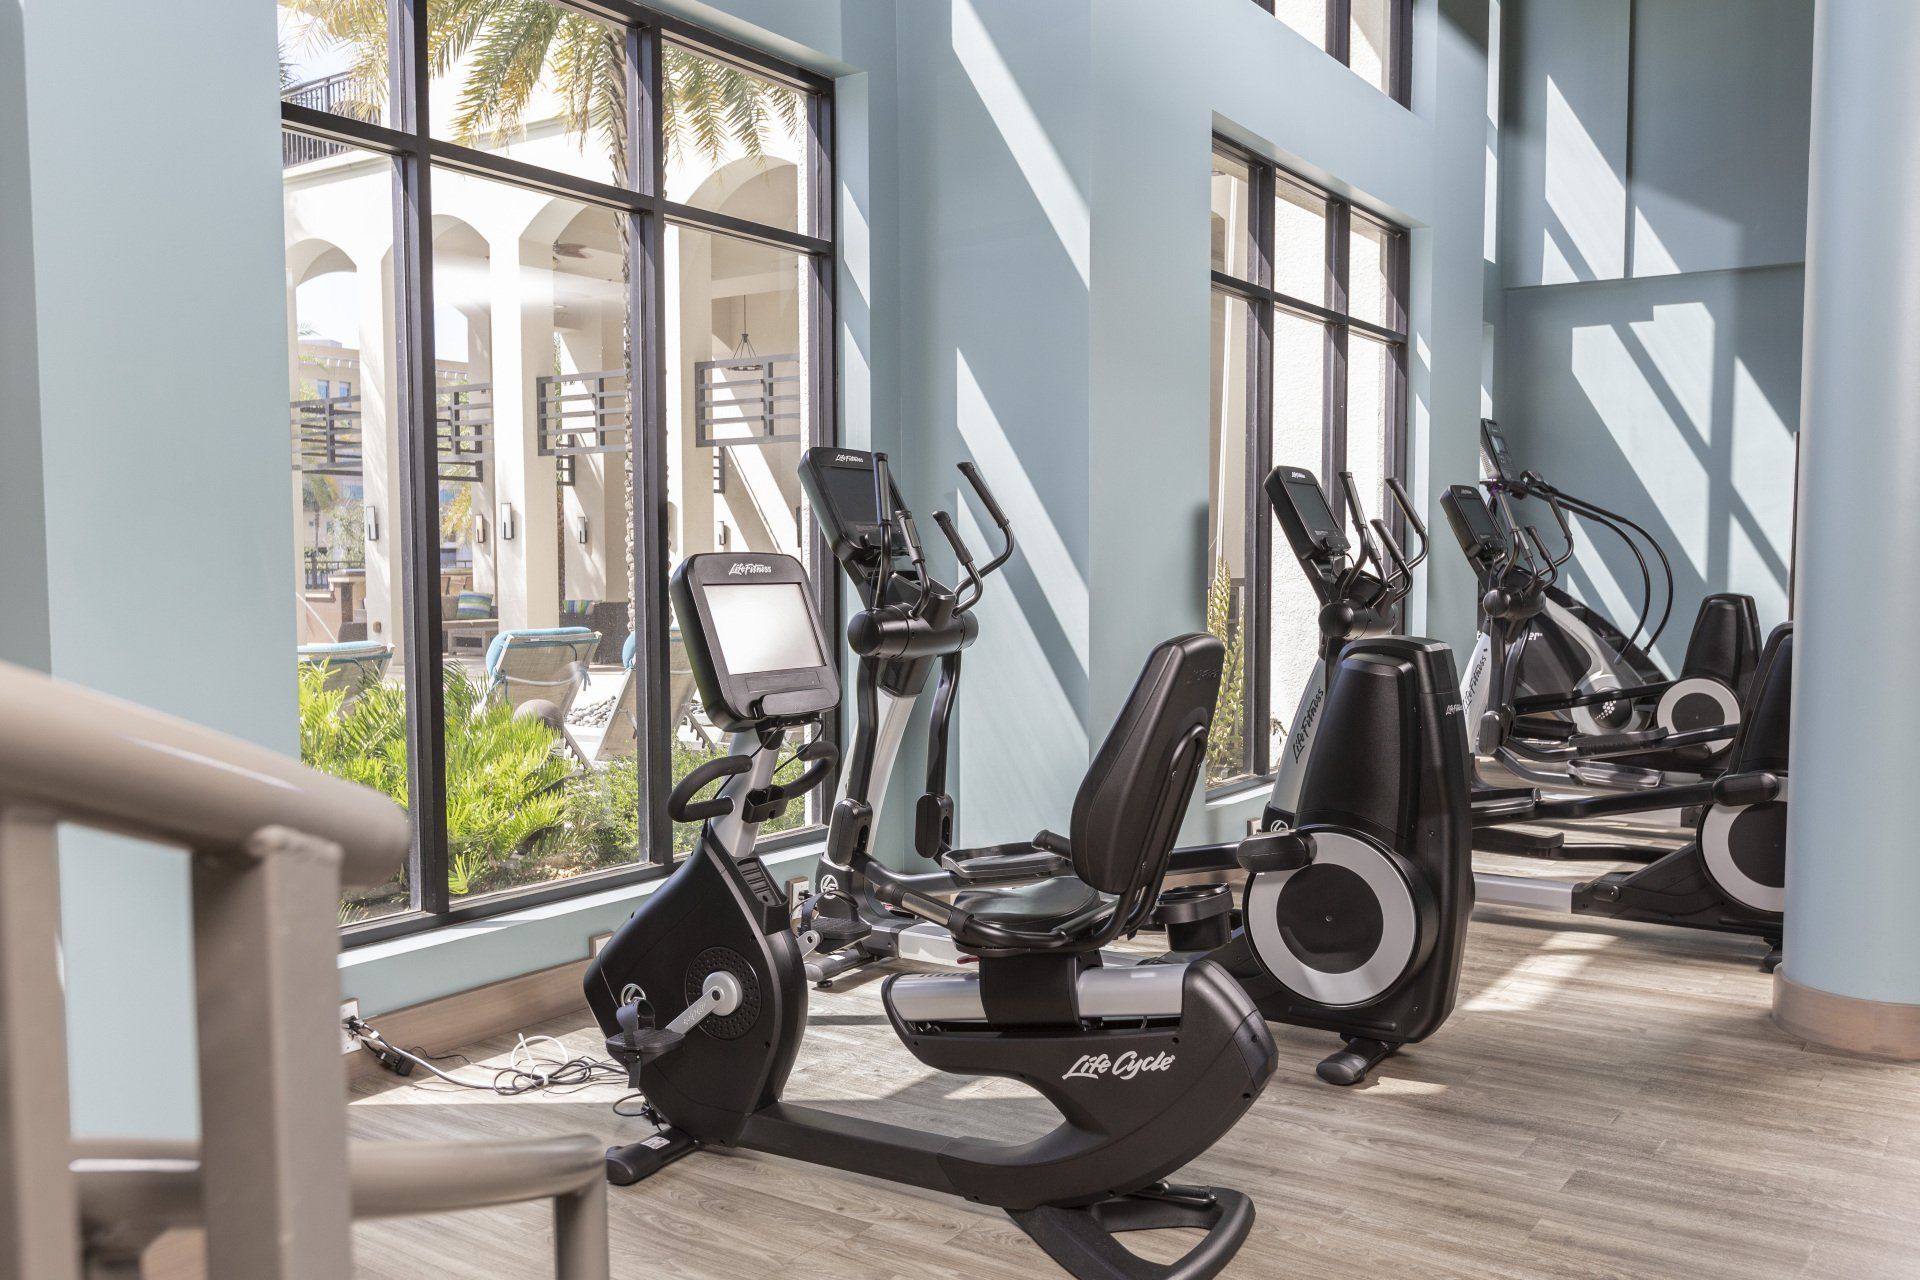 2Bayshore | Two-story fitness center overlooking Hillsborough Bay with
Fresh, refrigerated towels & complimentary water